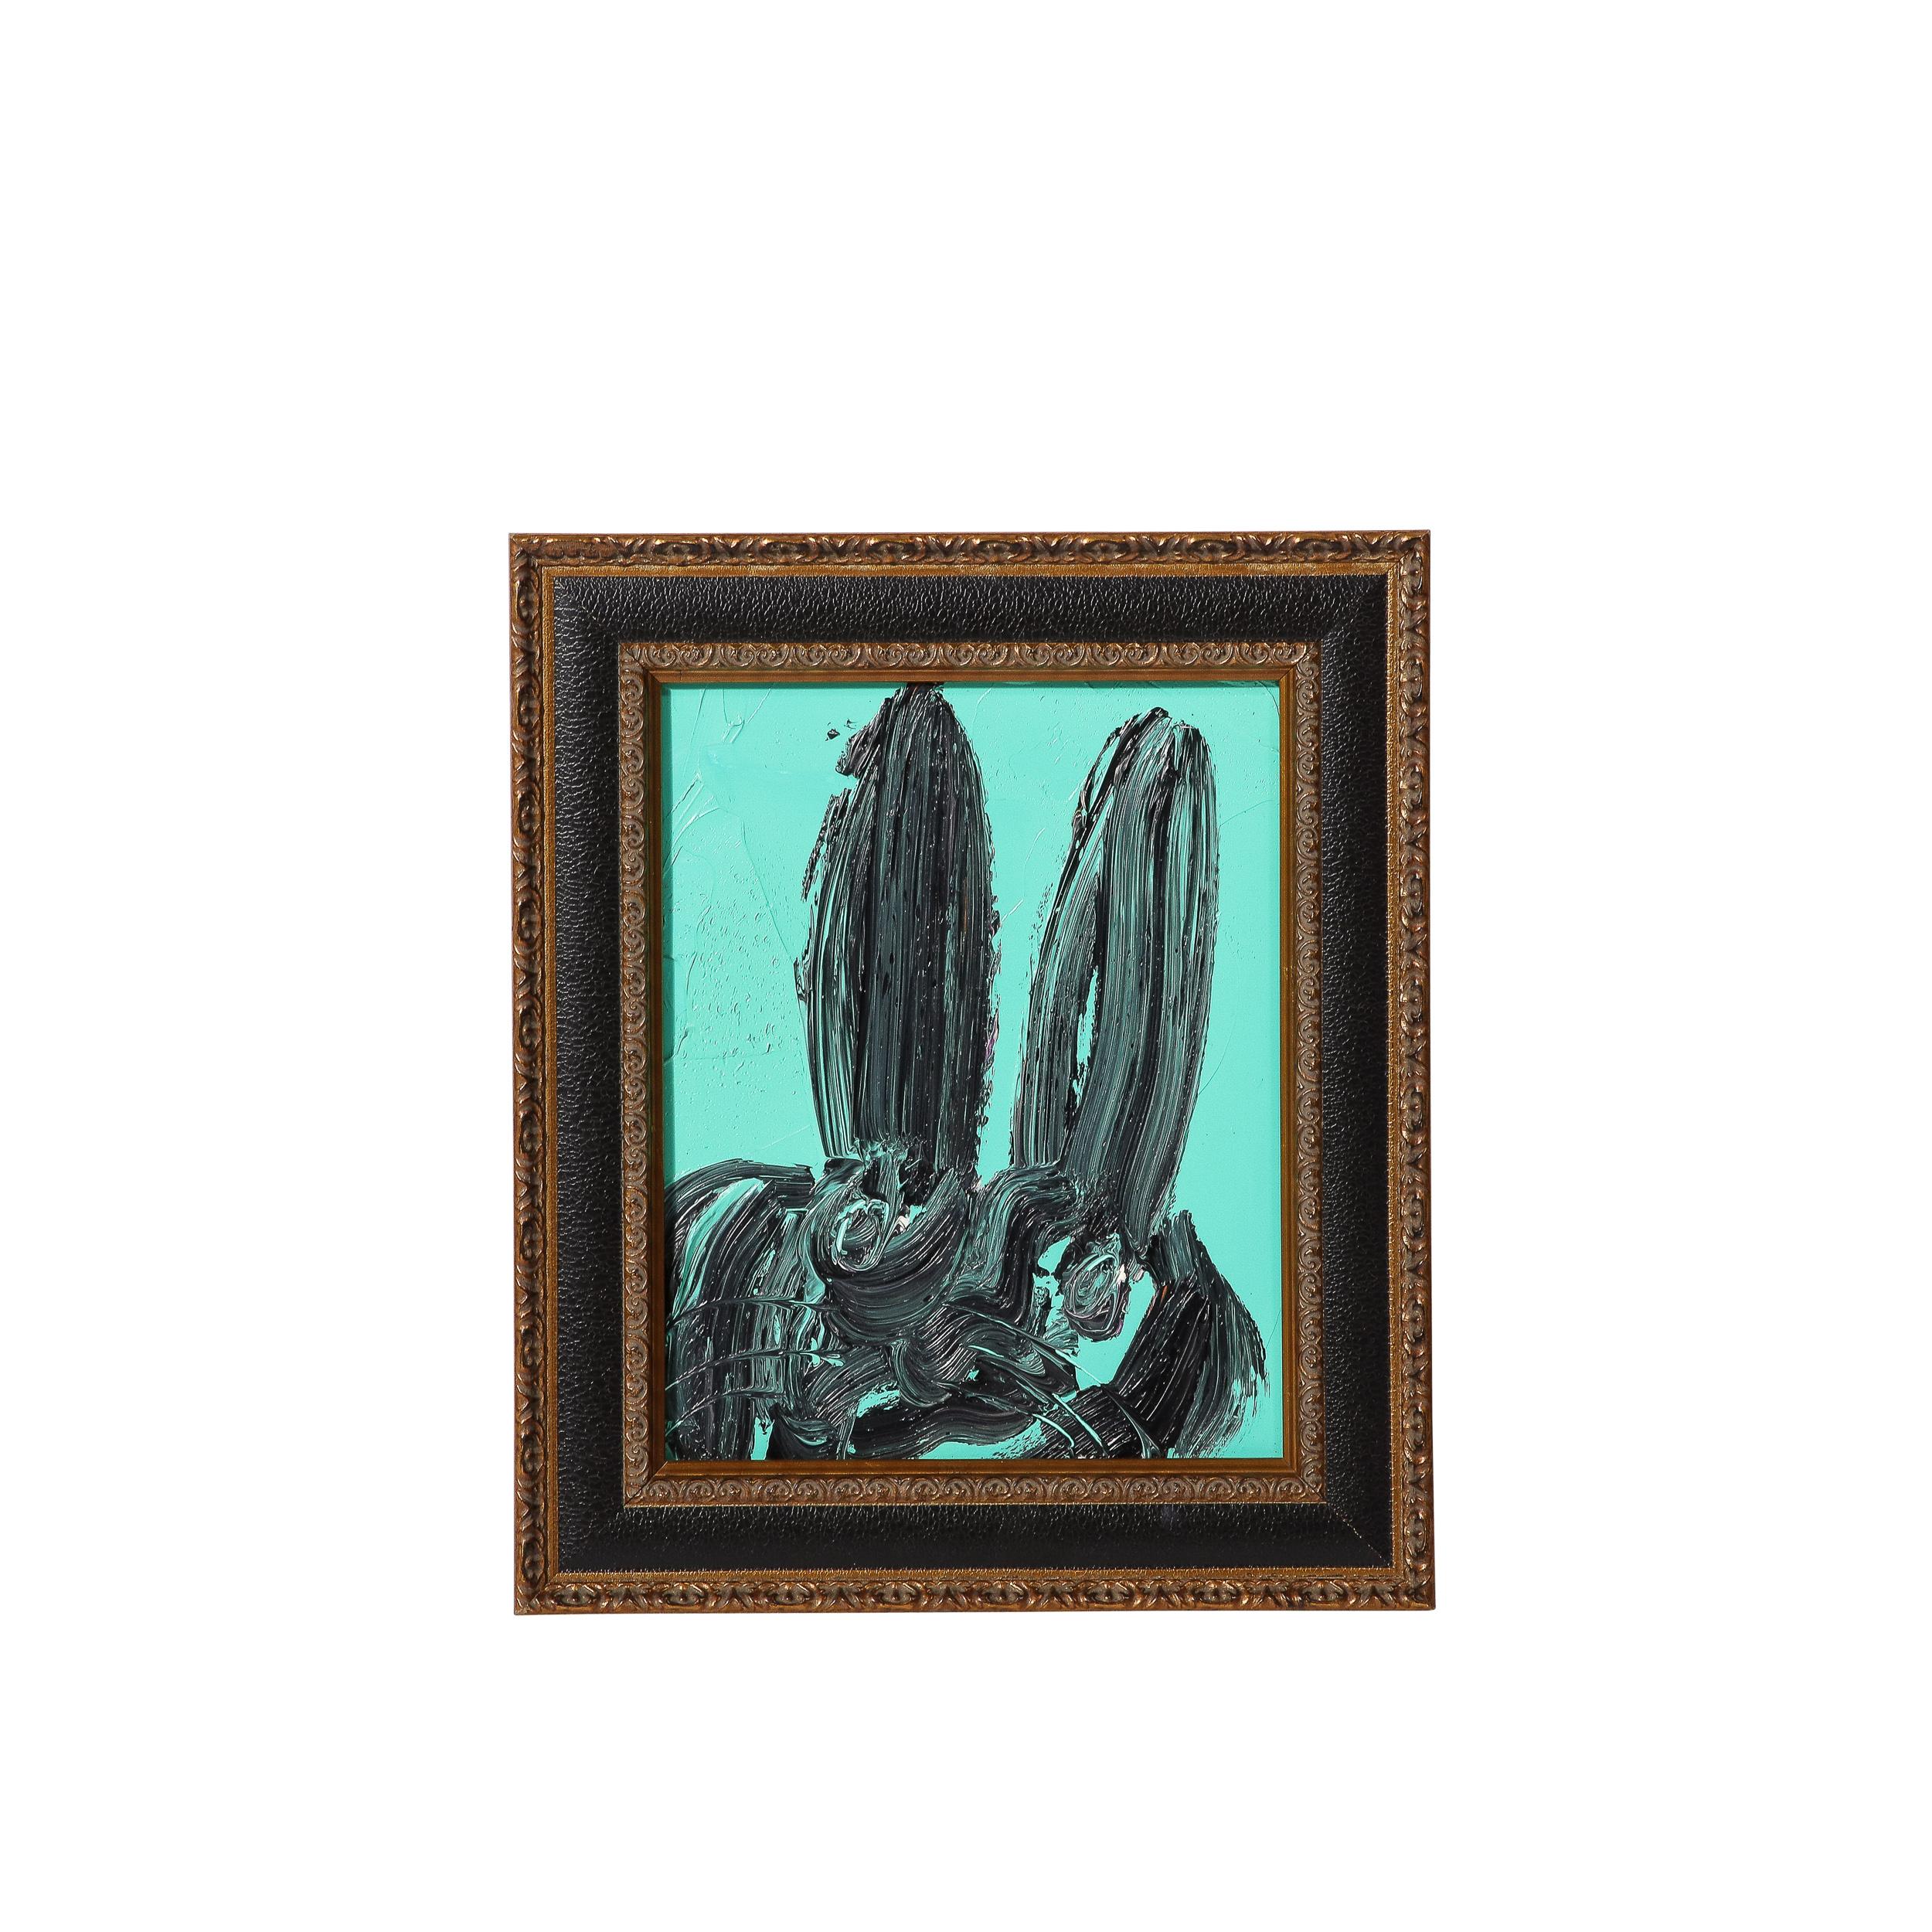 This whimsical and sophisticated painting was realized by the esteemed contemporary painter, Hunt Slonem in 2017. Featuring a stunning background hue in a high chroma blue green, this near brutalist rabbit is deftly rendered in thick and vigorous